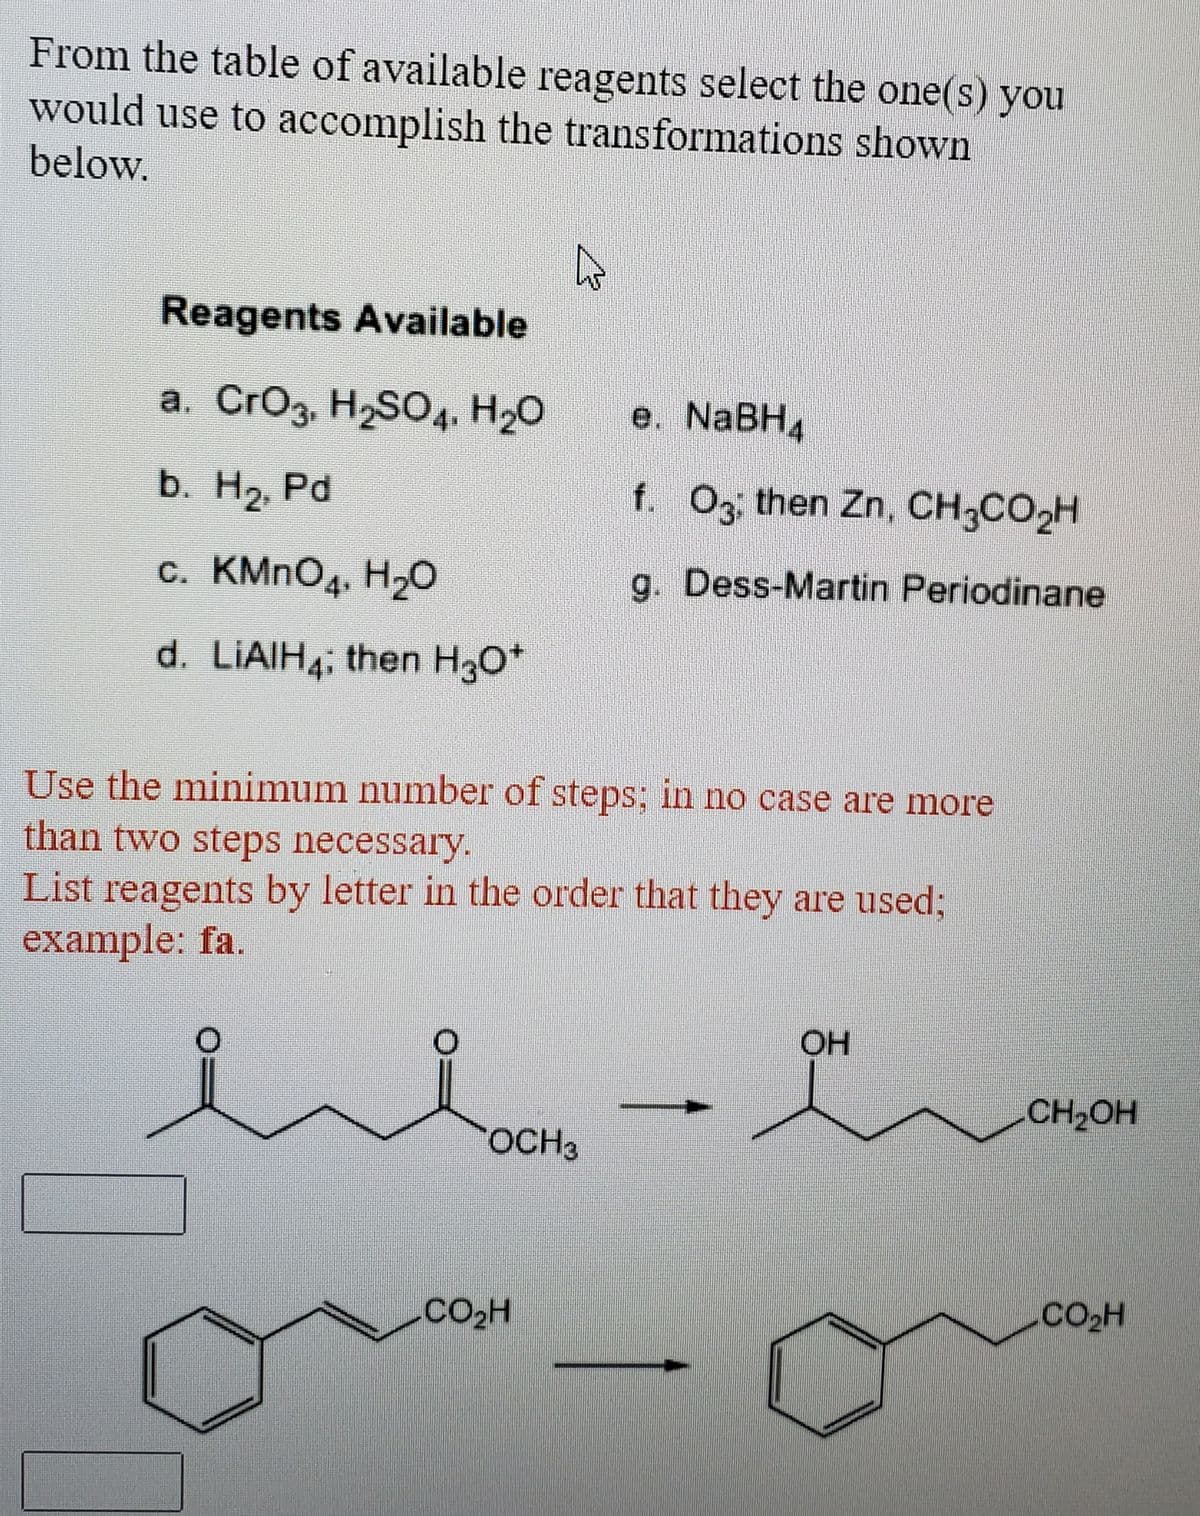 From the table of available reagents select the one(s) you
would use to accomplish the transformations shown
below.
Reagents Available
a. CrOg, H2SO4. H20
е. NaBH4
b. H2, Pd
f. Og then Zn, CH3CO2H
c. KMNO4. H20
g. Dess-Martin Periodinane
d. LIAIH4; then H30*
Use the minimum number of steps; in no case are more
than two steps necessary.
List reagents by letter in the order that they are used;
example: fa.
OH
CH2OH
OCH3
CO2H
